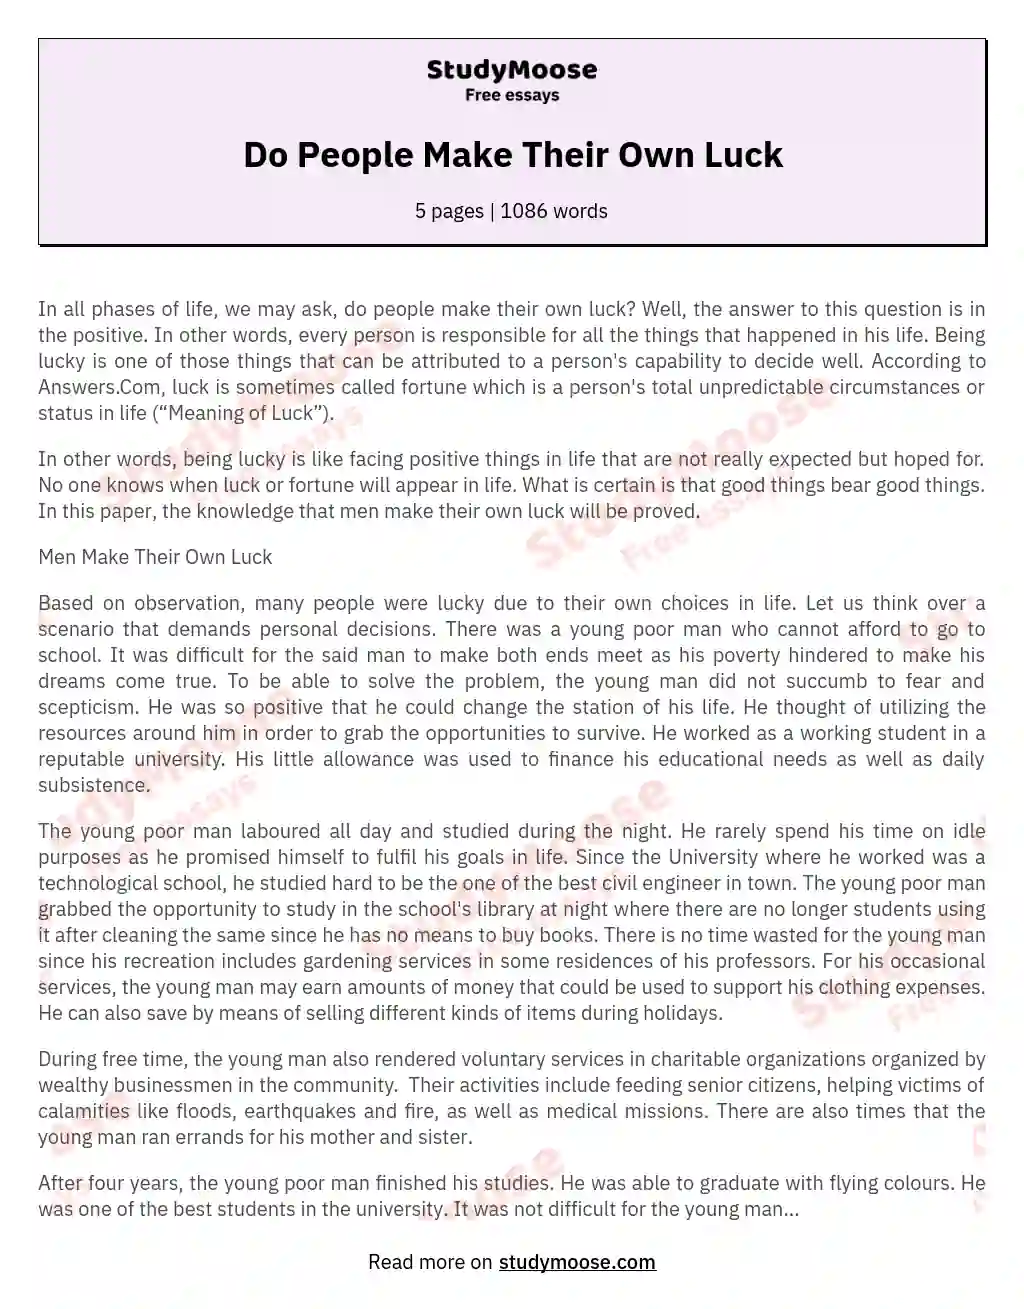 Do People Make Their Own Luck essay